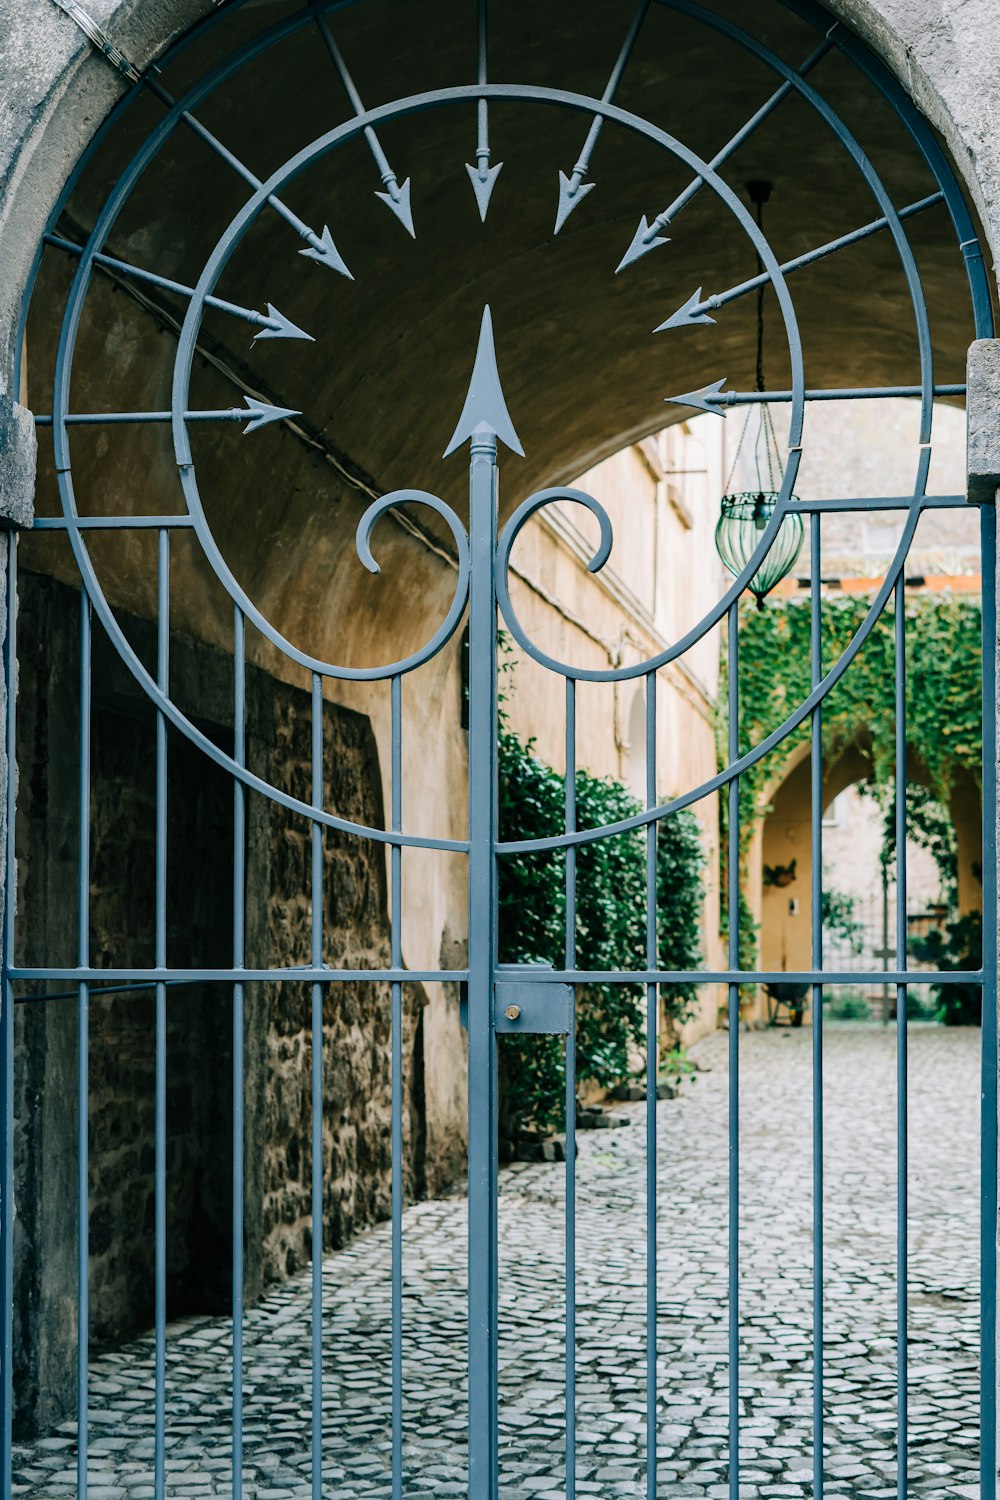 a gate that has a clock on it